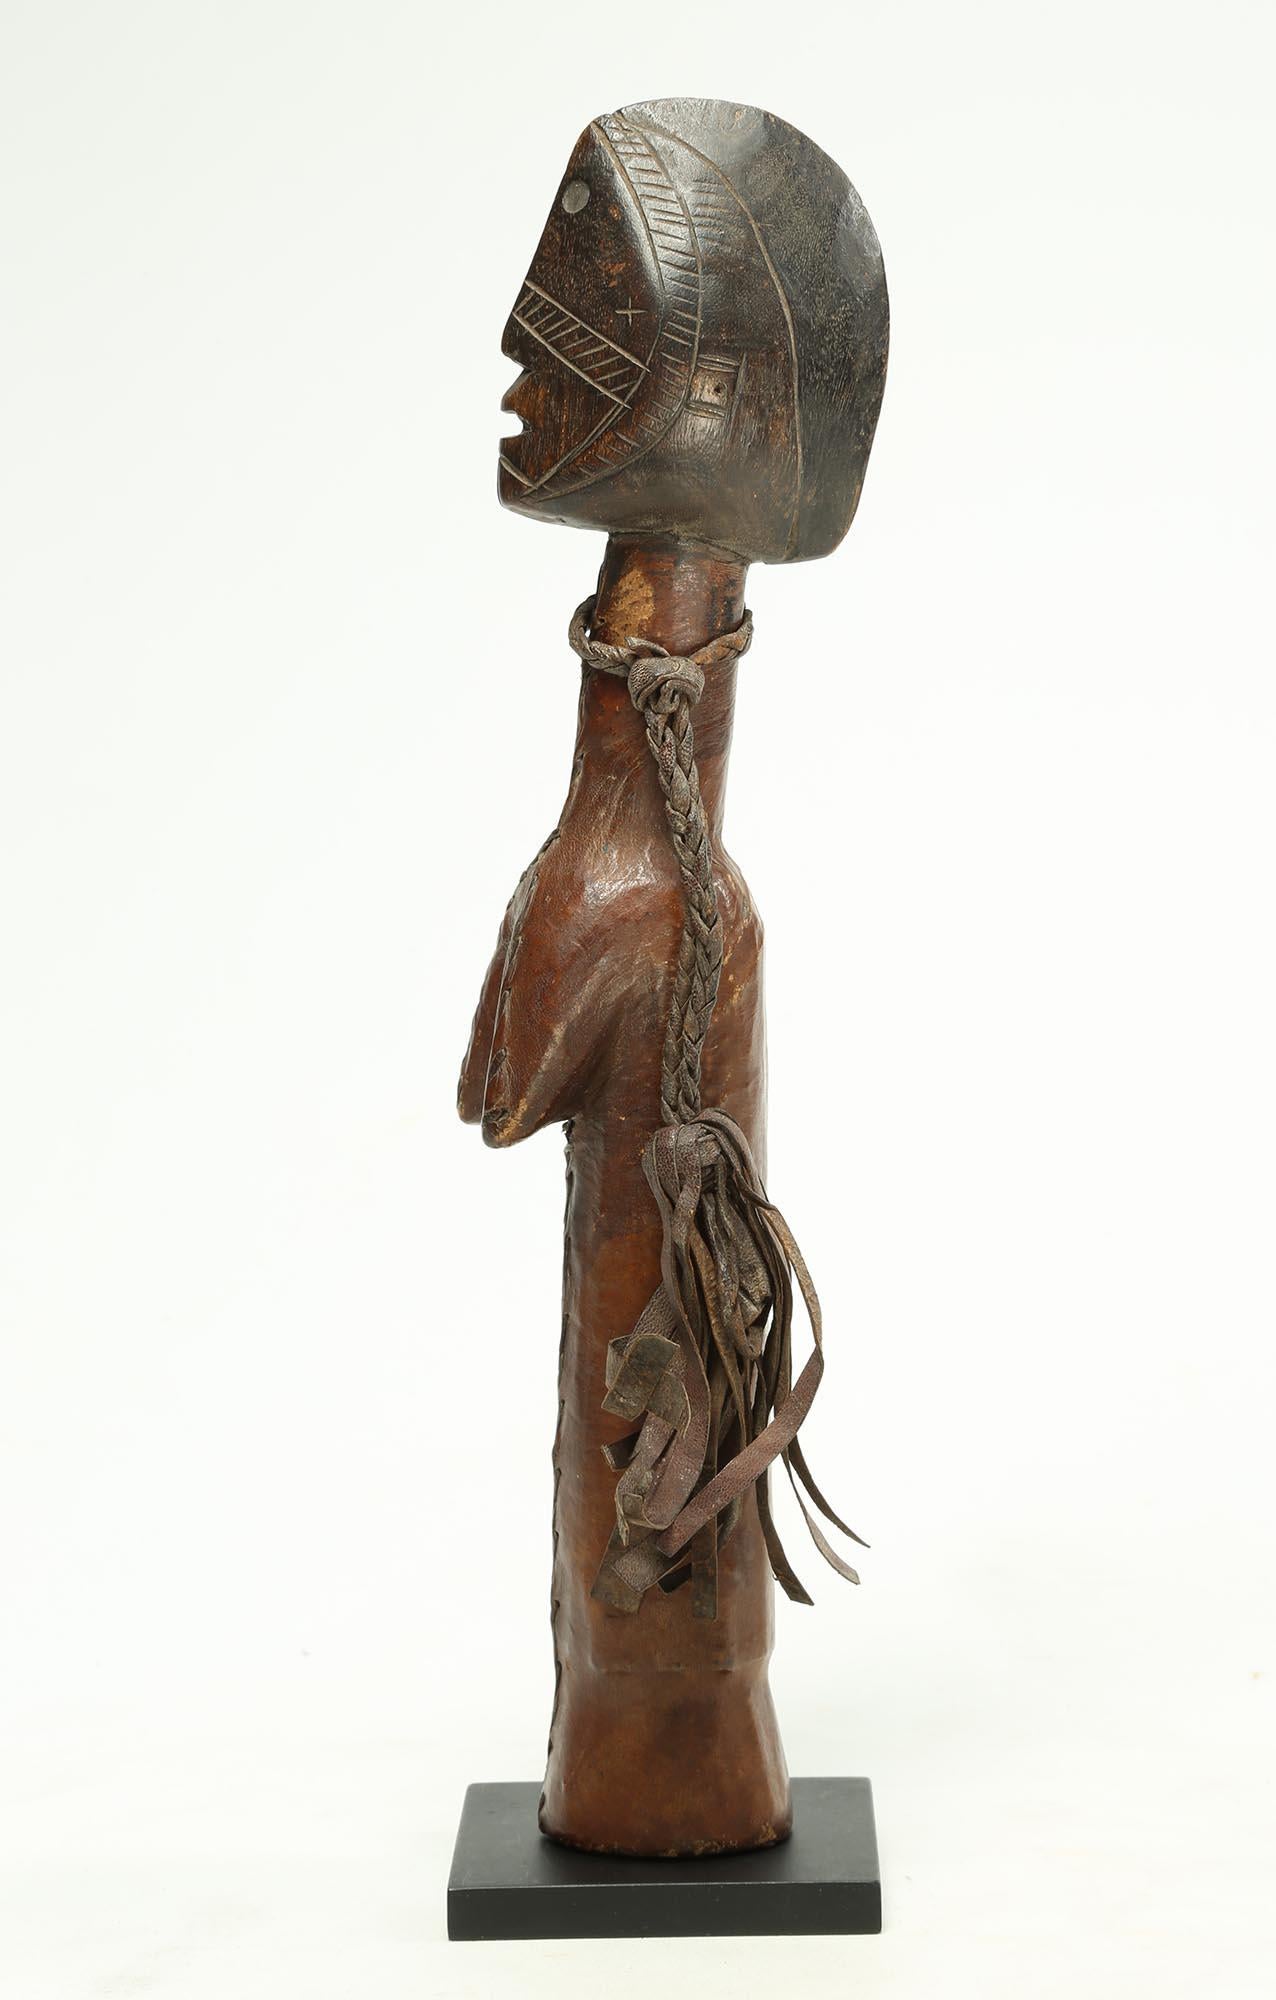 Striking carved wood Mossi doll figure (biga) with rare leather covering. The head slightly tilted upward as though star gazing, giving this one great personality and animation. Classic Mossi scarification marks around face, early 20th century.